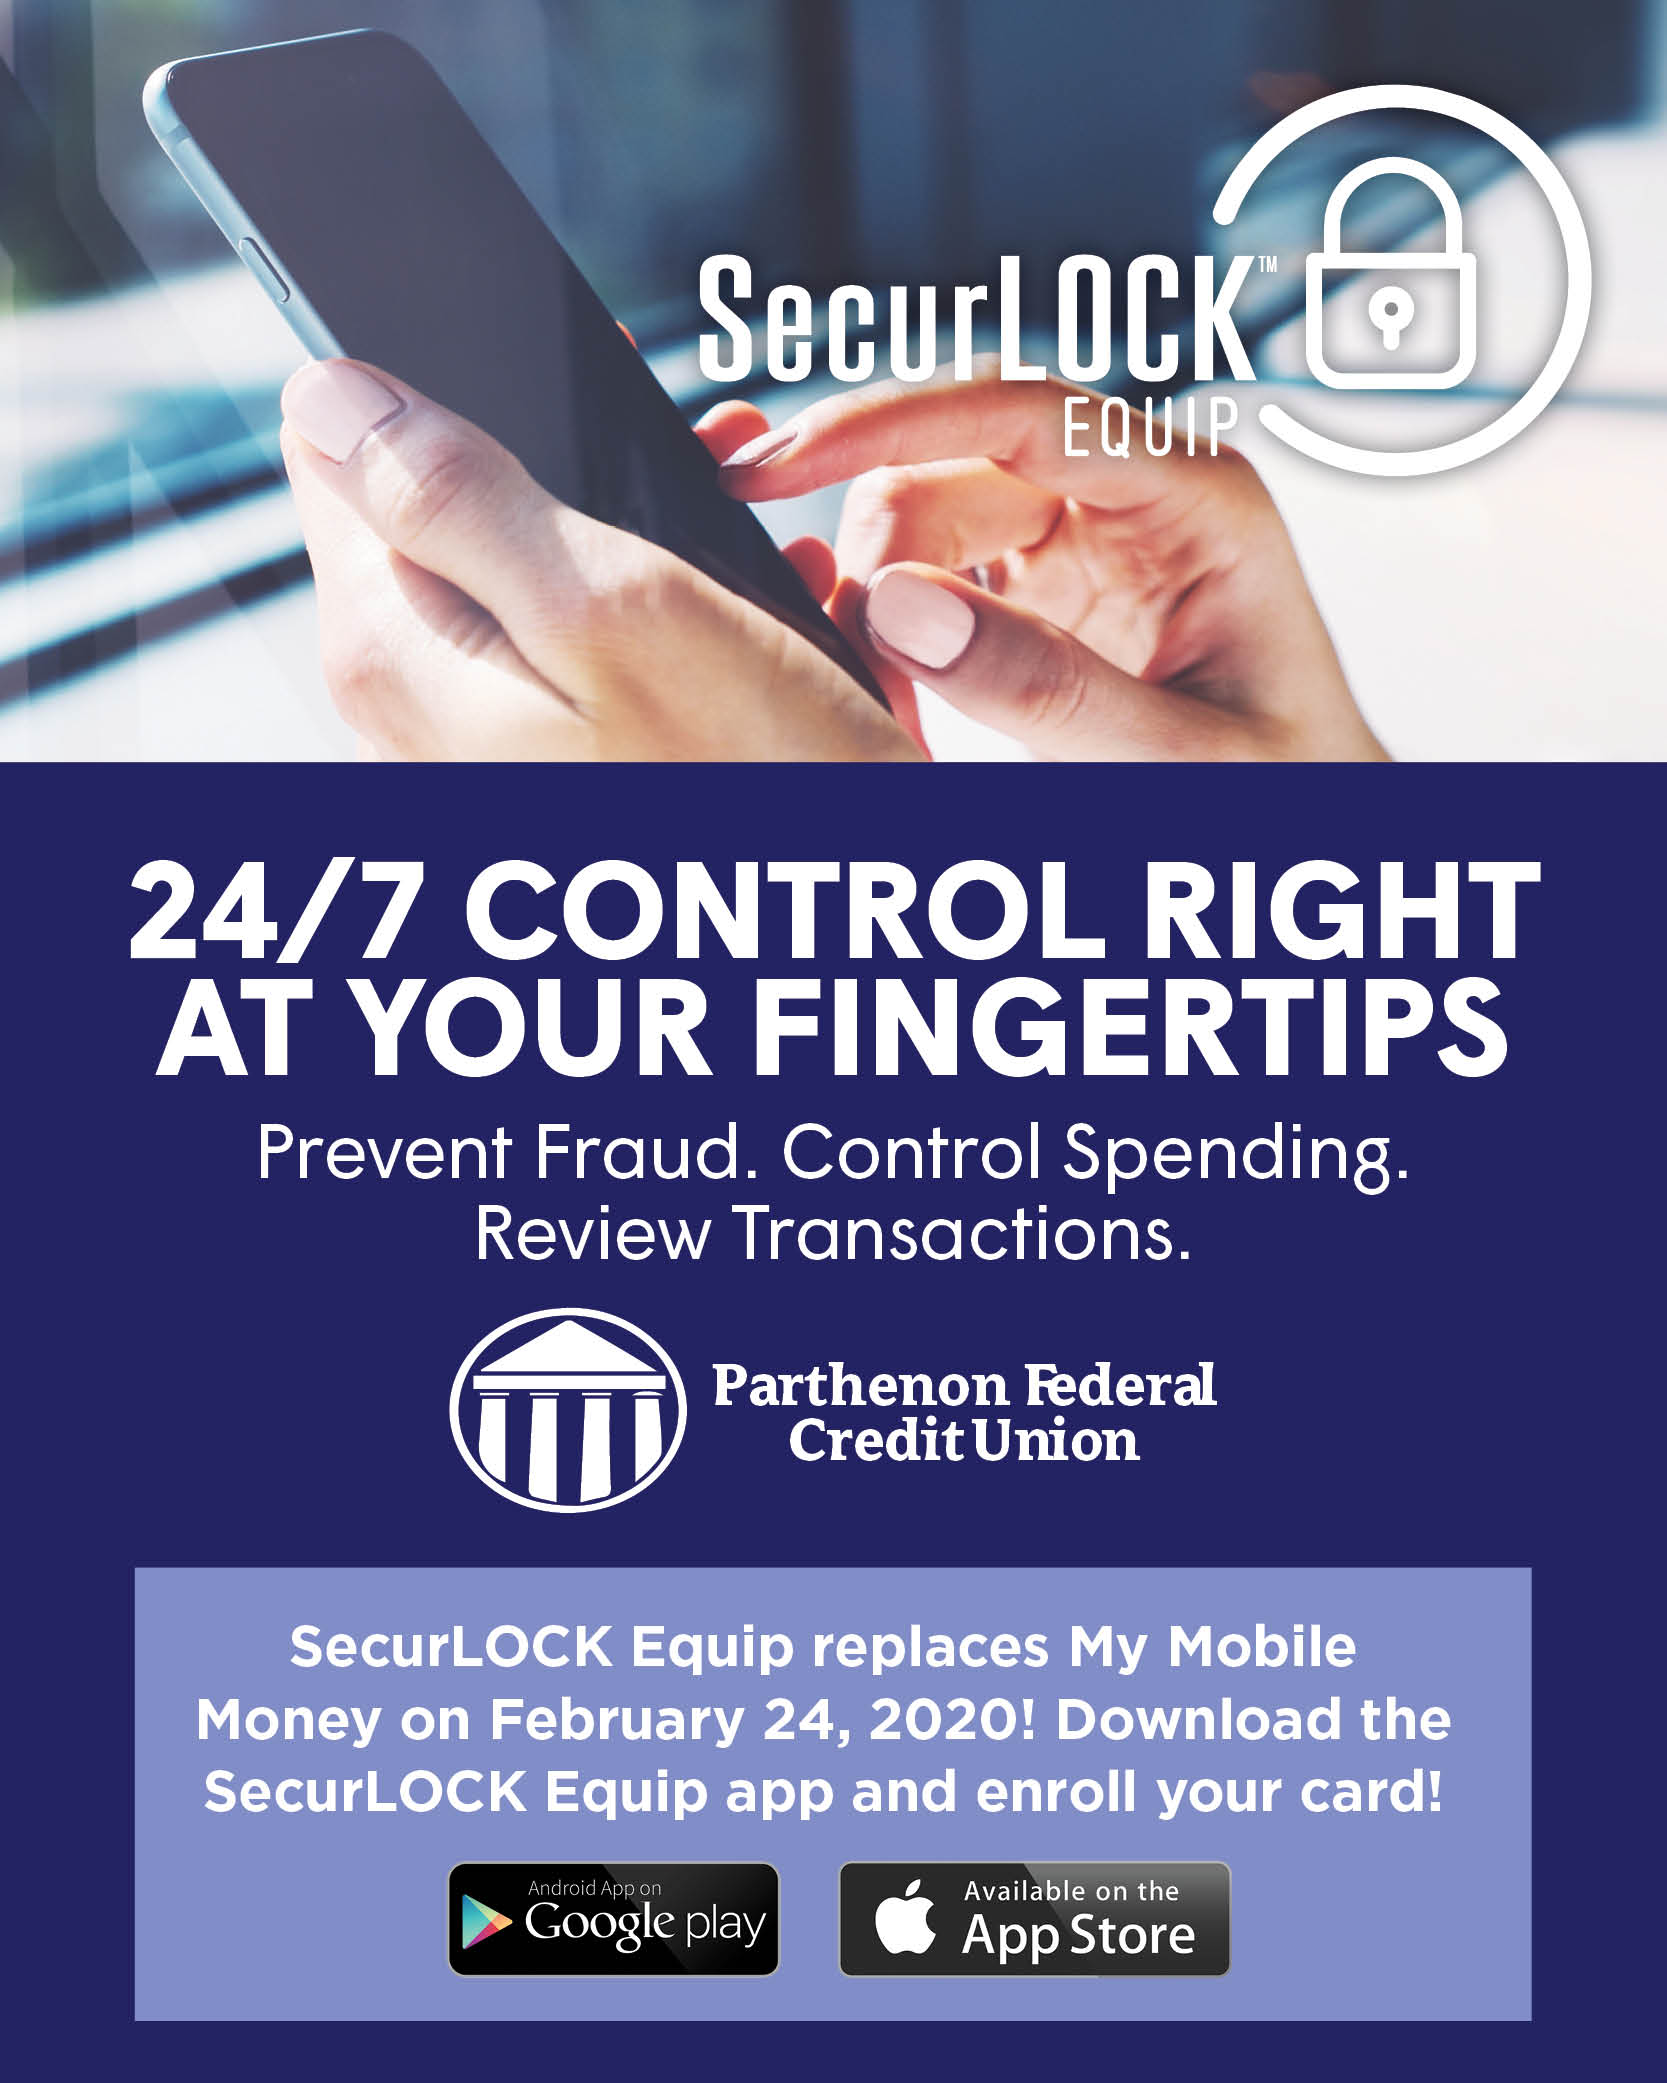 SecurLOCK Equip.  24/7 control at your fingertips.  Replaces My Mobile Money on February 24, 2020!  Download the SecurLOCK Equip app and enroll your card!